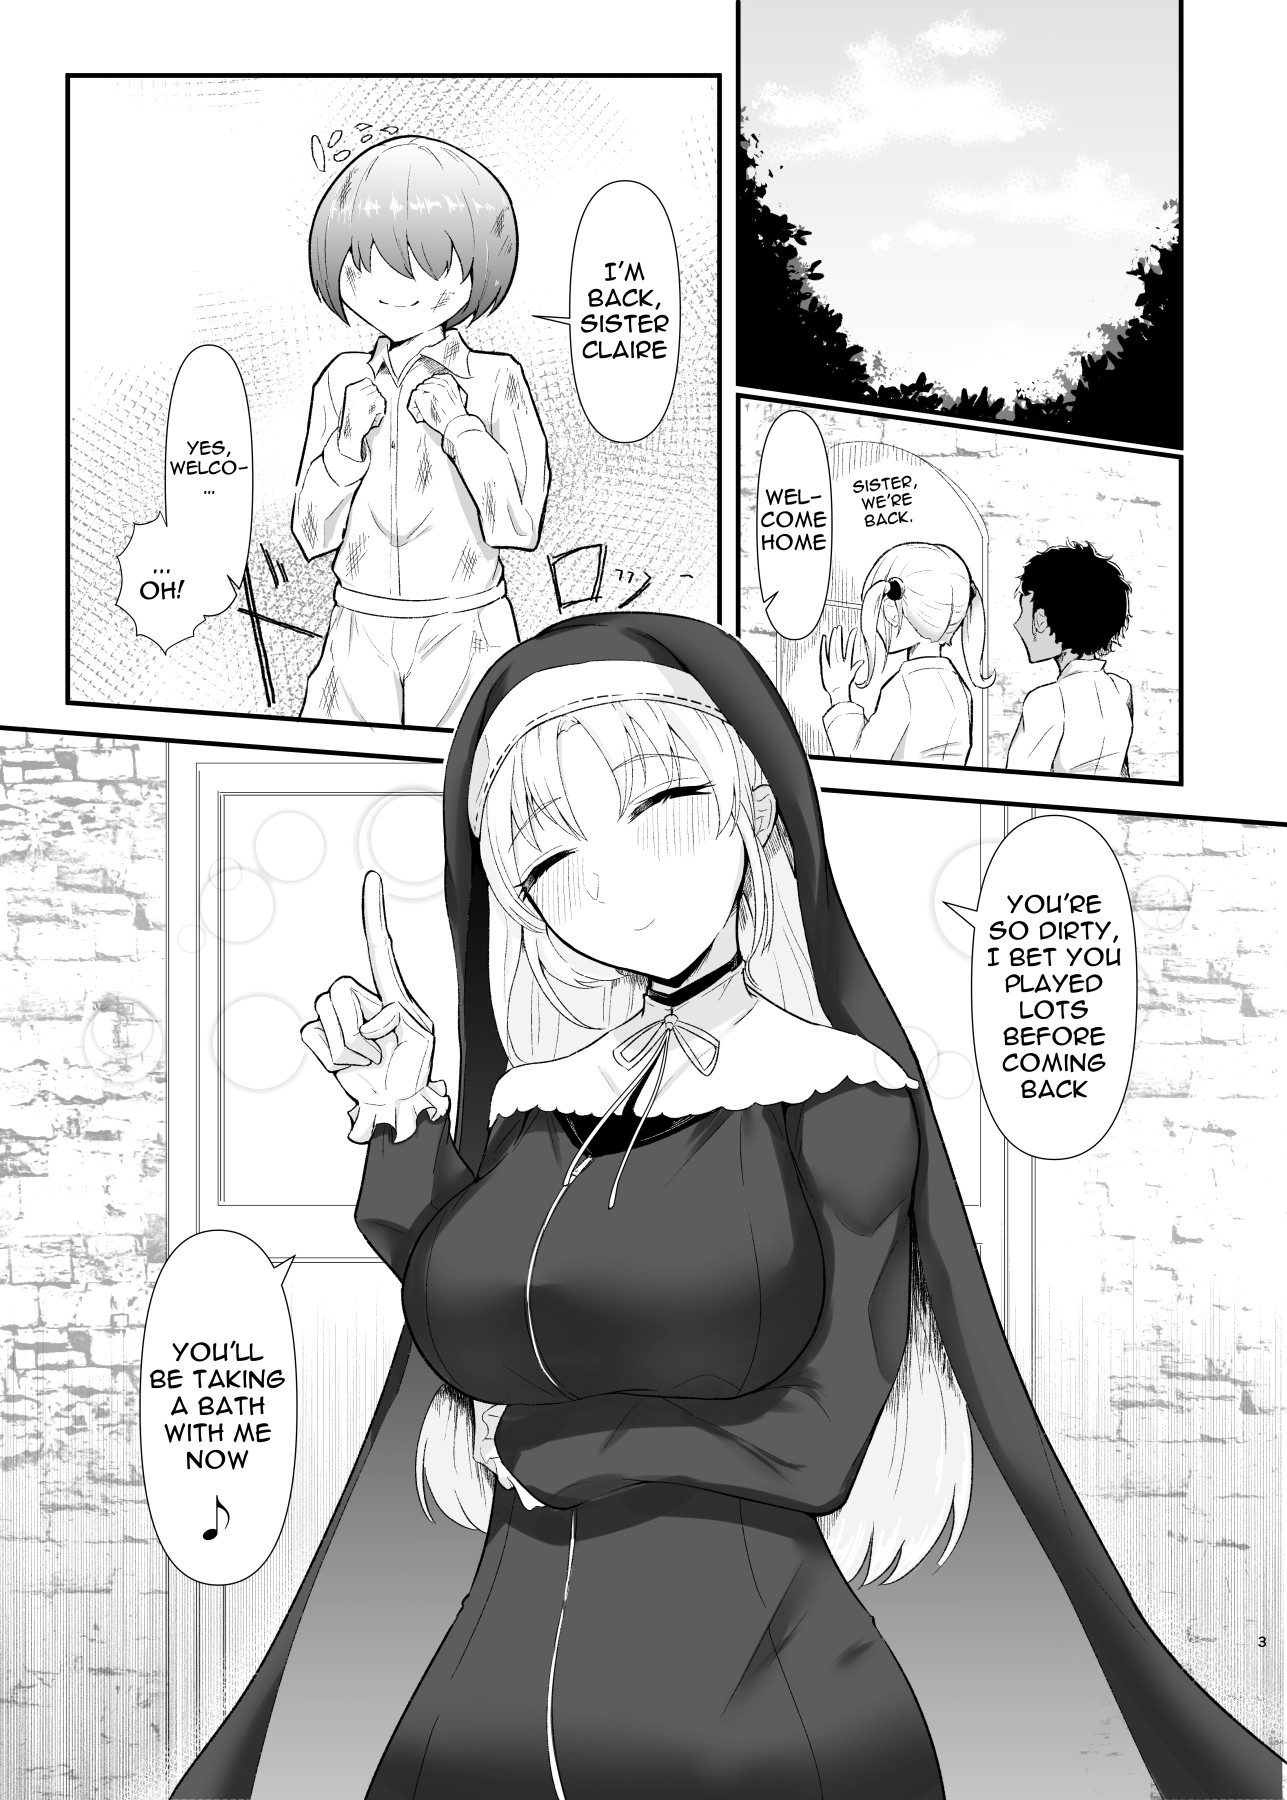 Hentai Manga Comic-My First Time With Cleaire-san-Read-2